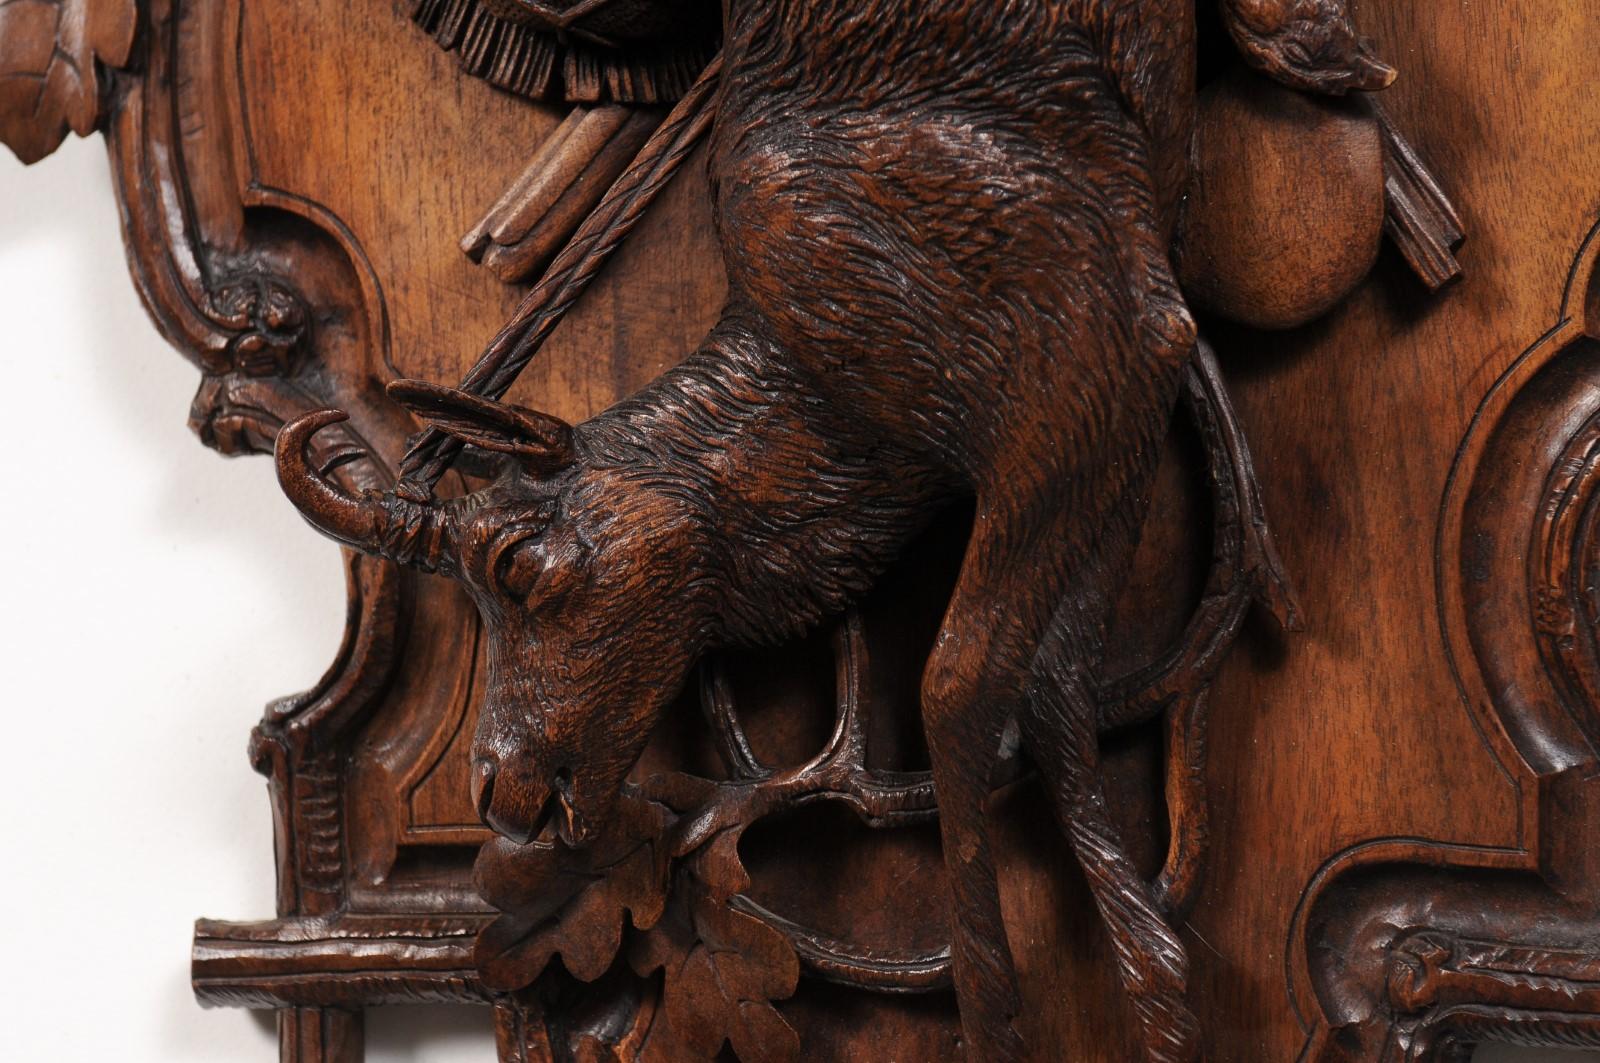 Black Forest Period 19th Century German Oak Wall Carving with Hunting Trophy For Sale 4